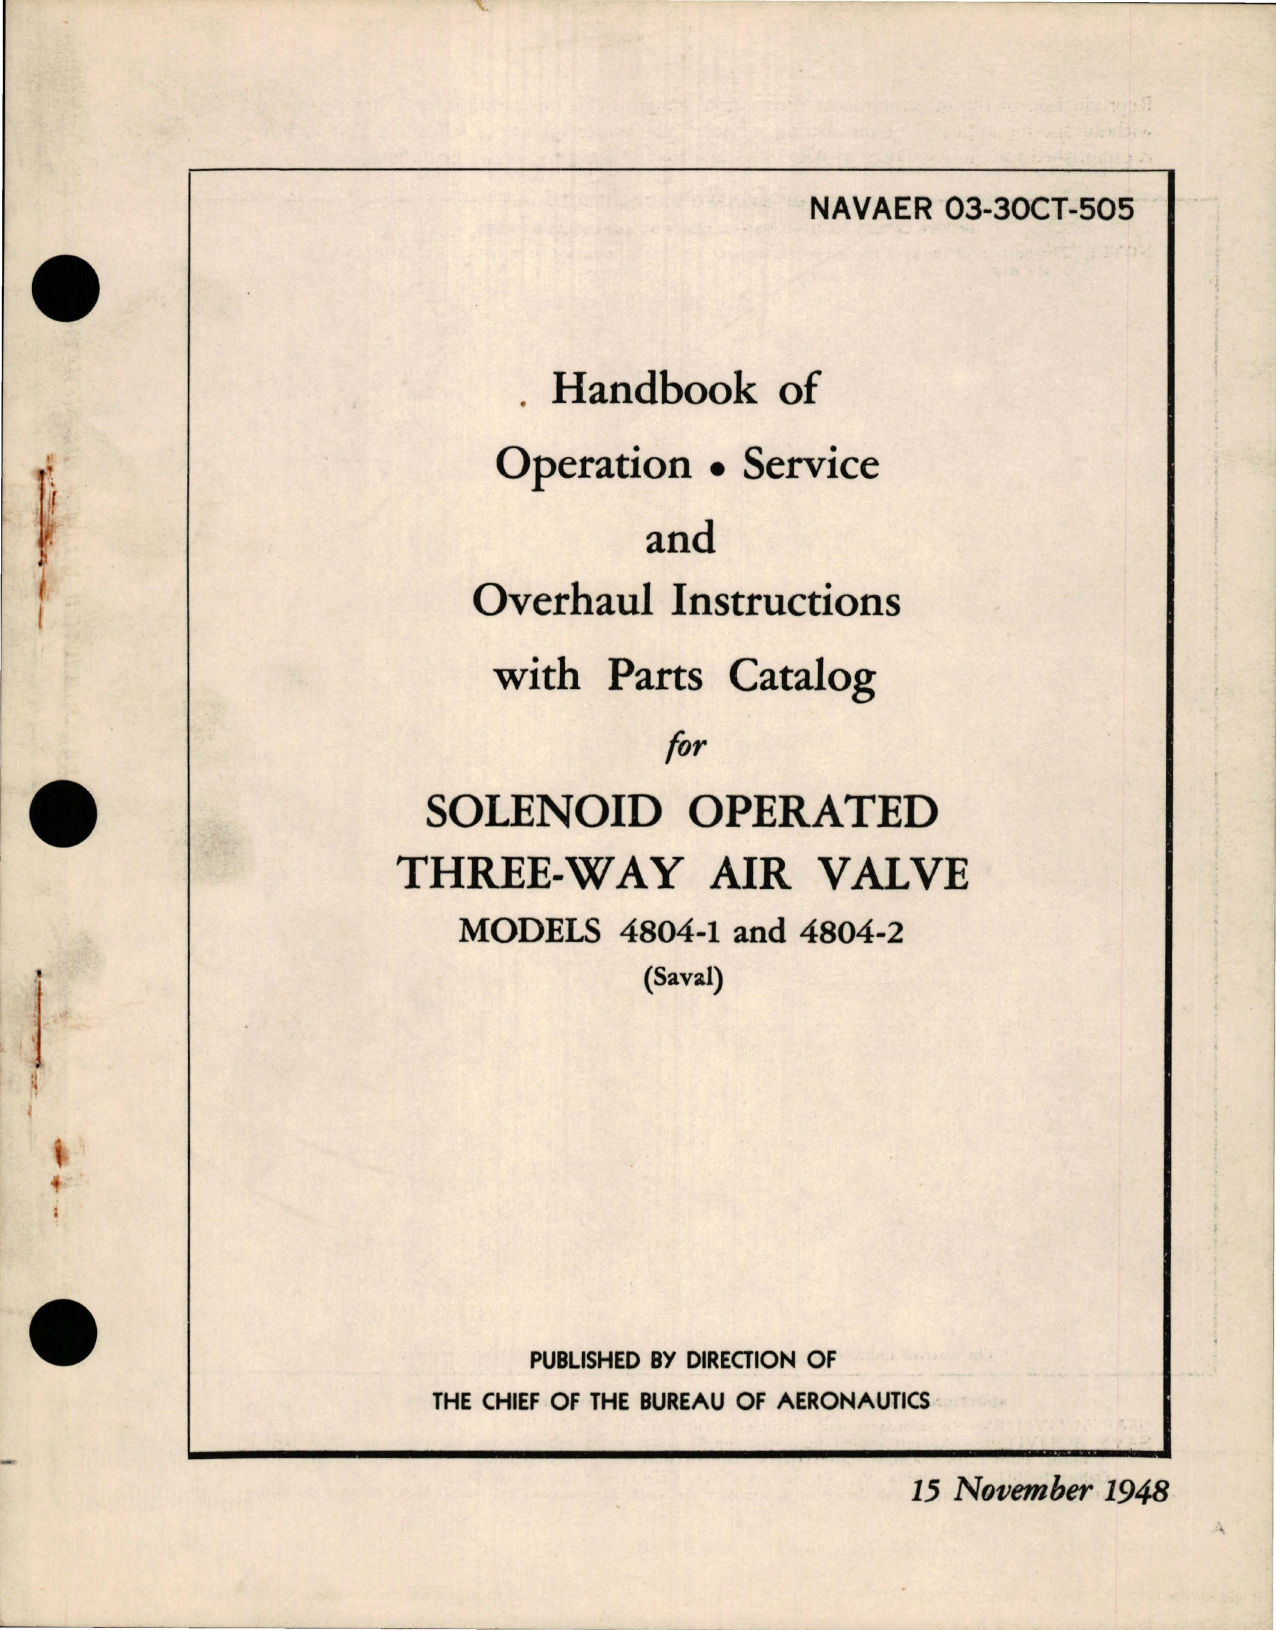 Sample page 1 from AirCorps Library document: Operation, Service, and Overhaul Instructions with Parts for Solenoid Operated Three-Way Air Valve - Models 4804-1, 4804-2